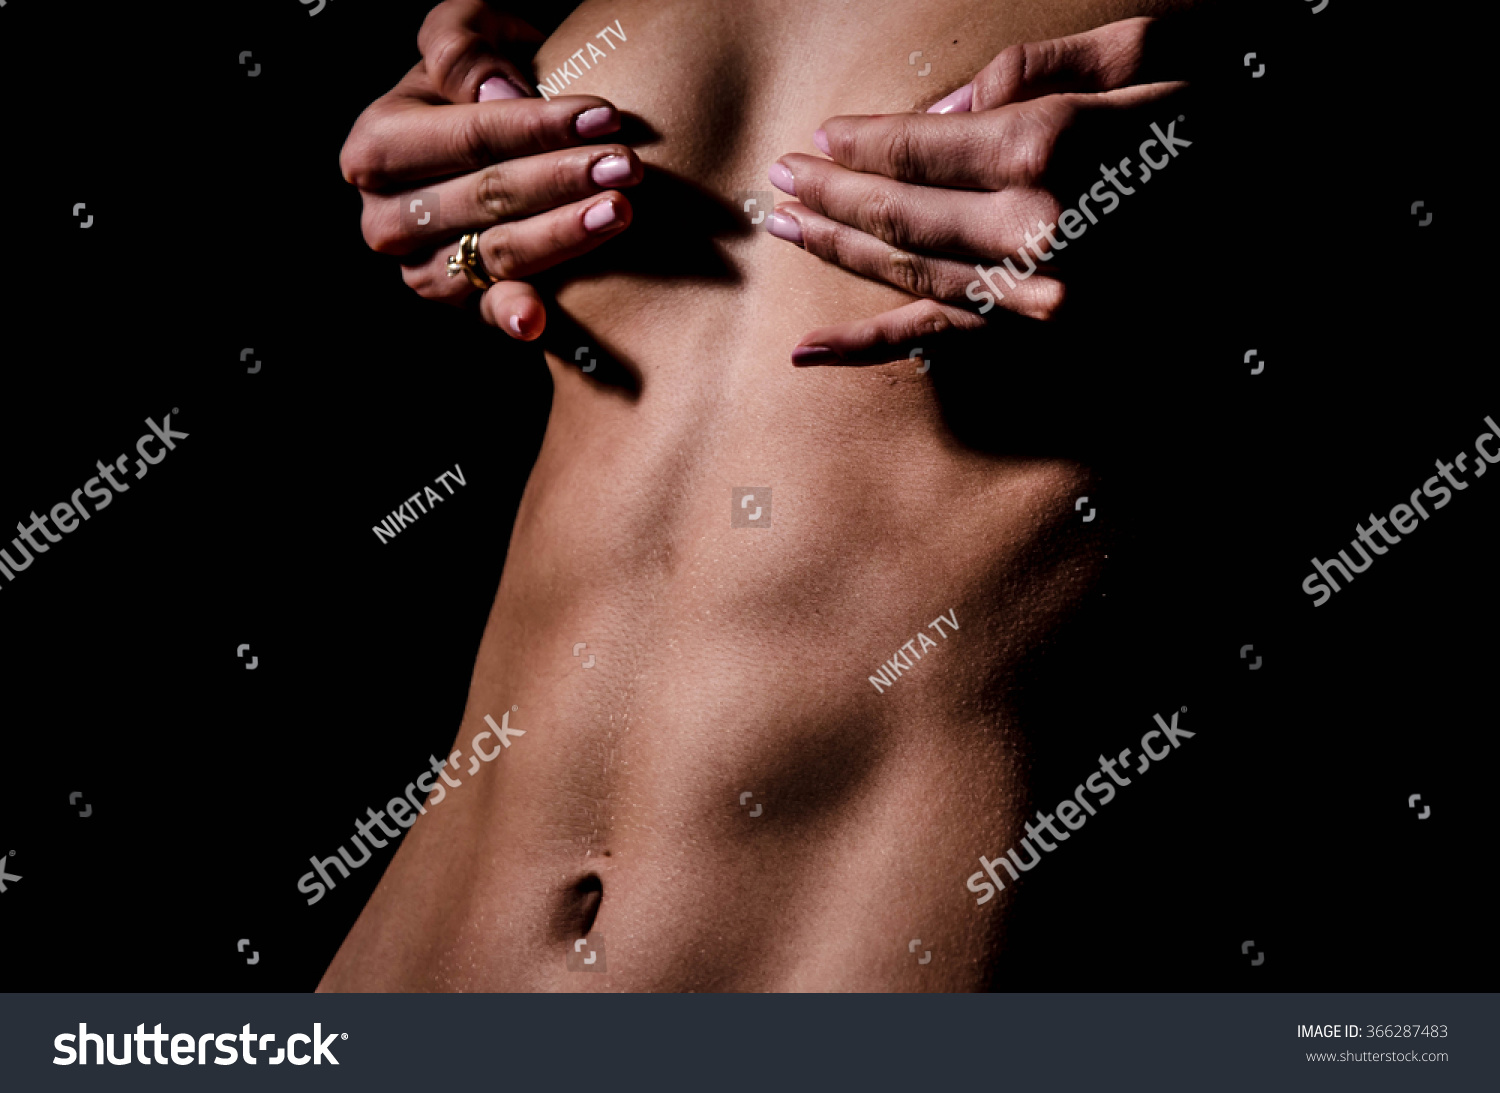 Black girl nude breast close up Closeup Naked Sexual Wet Female Body Stock Photo Edit Now 366287483